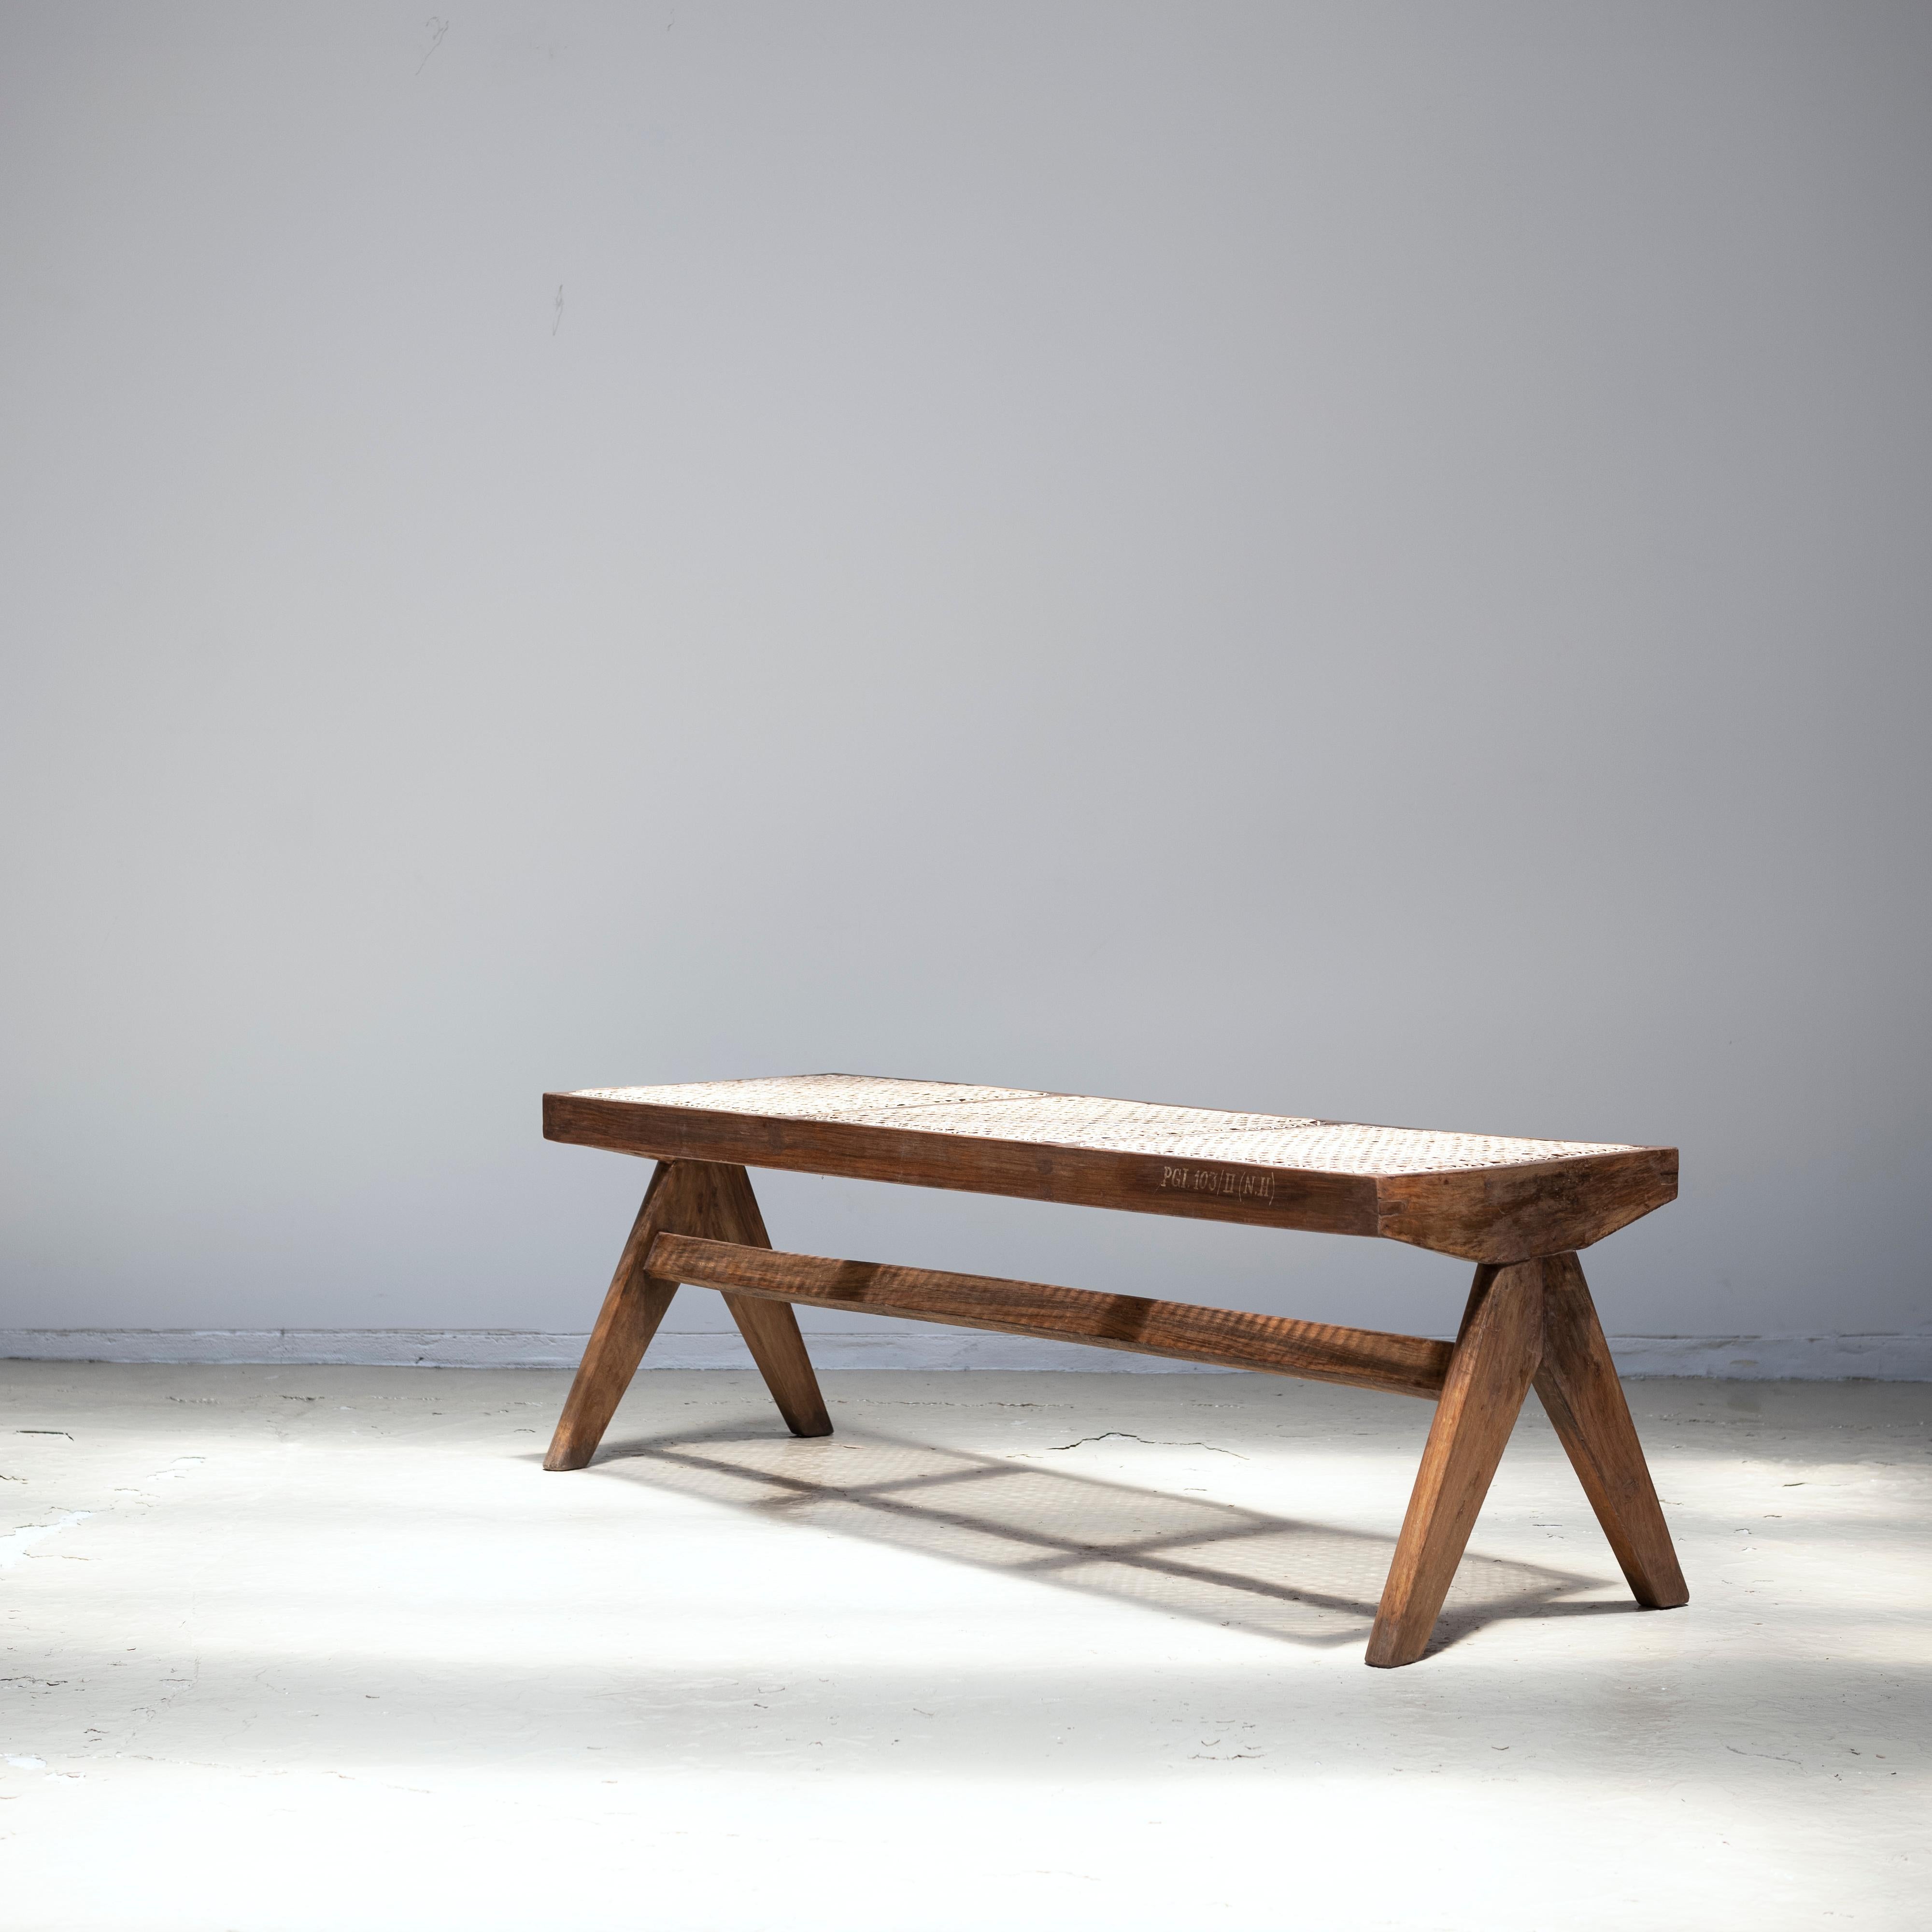 A bench in solid teak wood and cane designed by Pierre Jeanneret.
Circa 1955.
Provenance: Post-Graduate Institute, Chandigarh, India
 